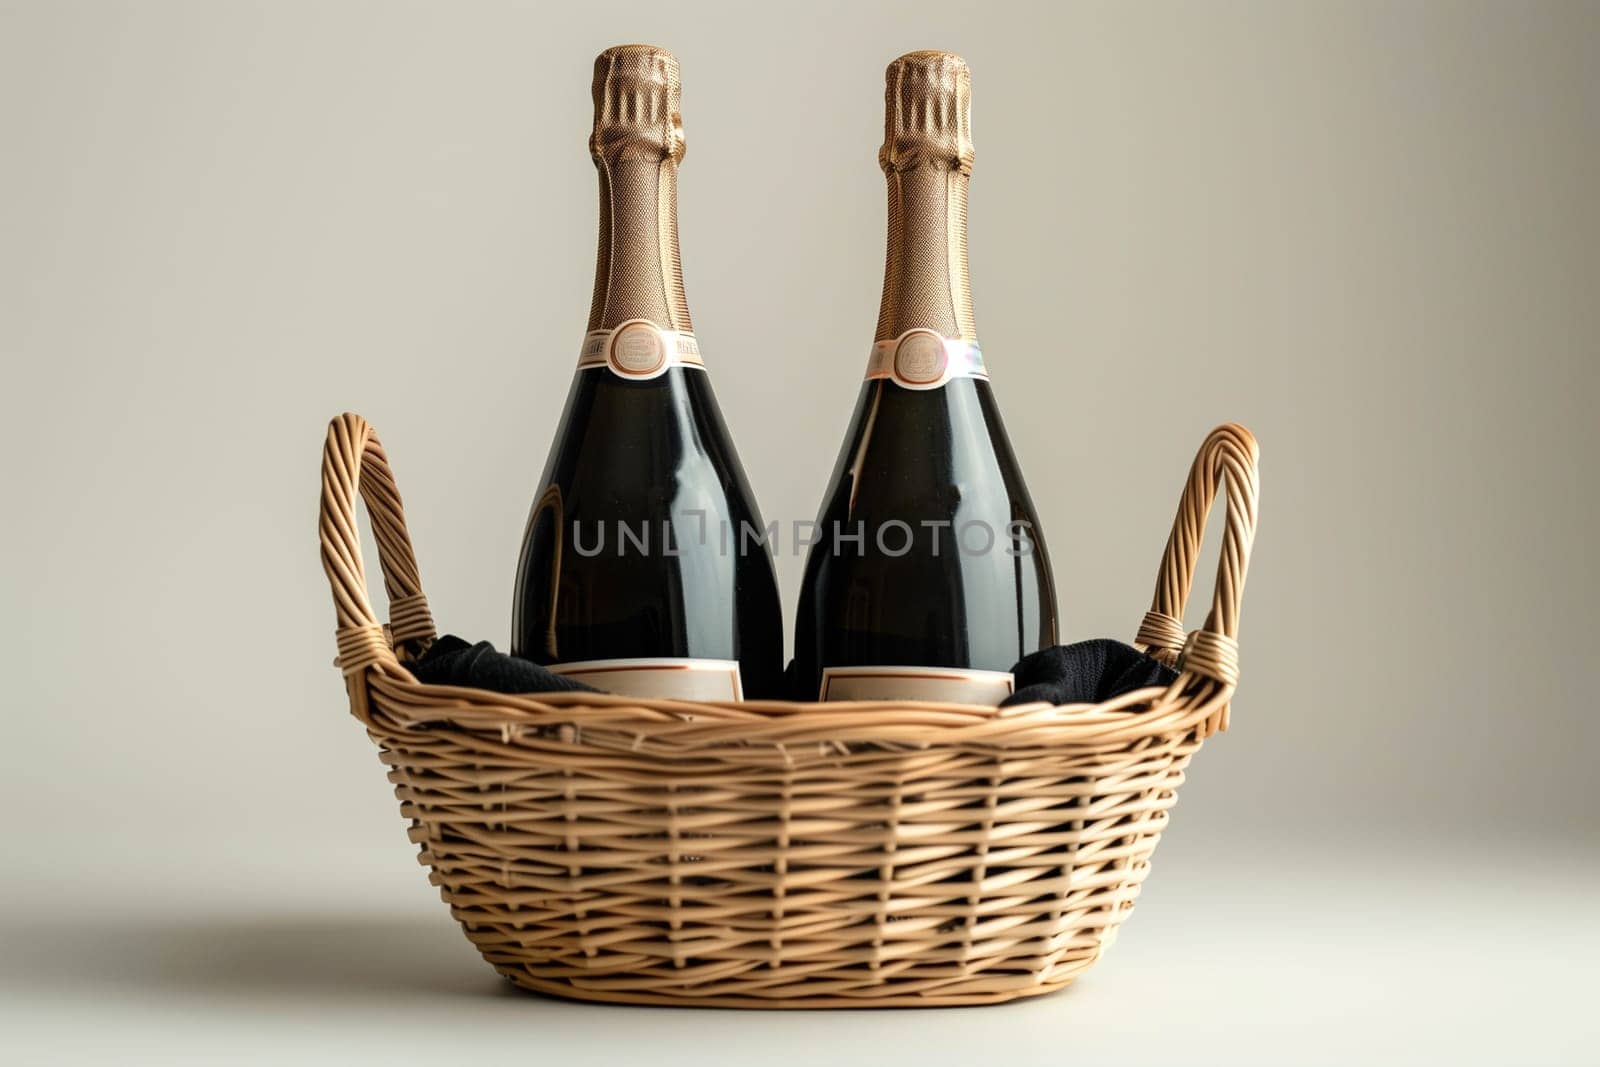 A pair of champagne bottles are nestled in a wicker basket, each adorned with an elegant golden ribbon, suggesting a celebration or a gift.